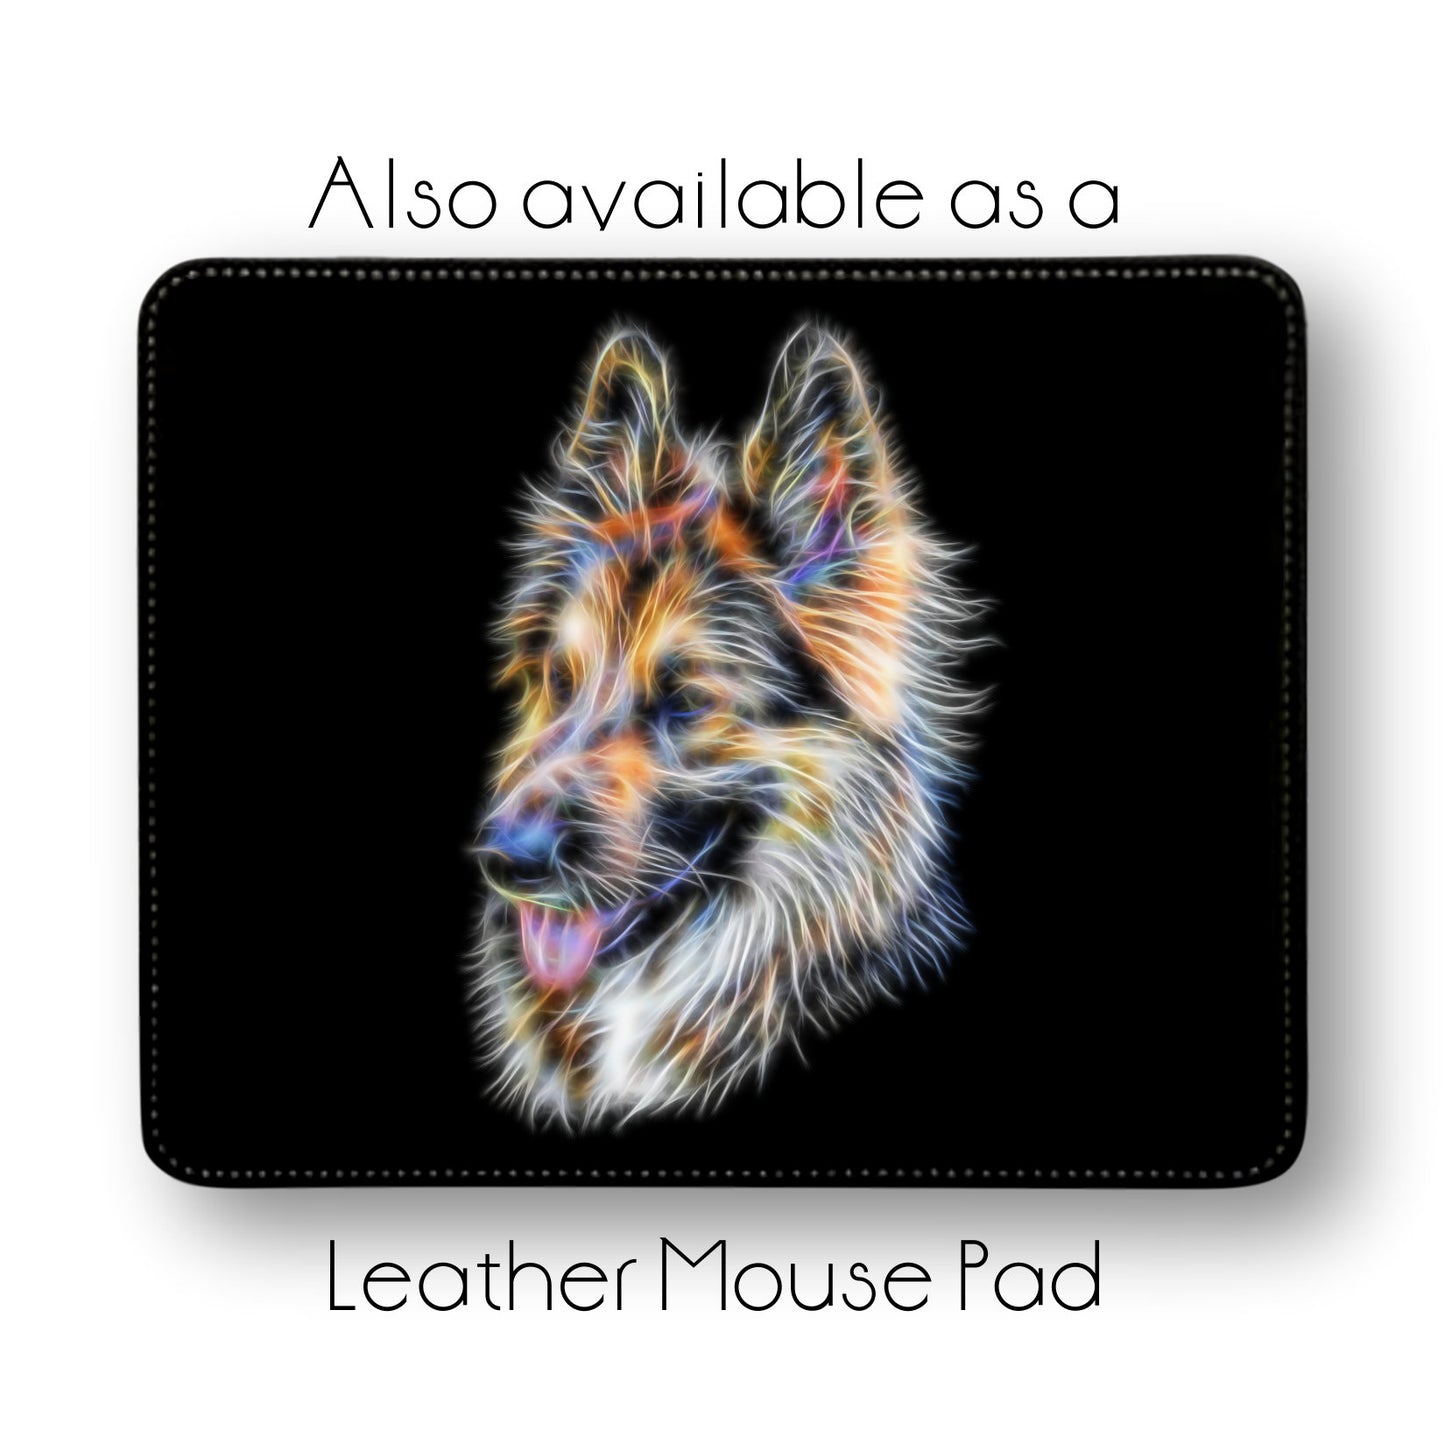 Long Haired German Shepherd Metal Wall Plaque. Also available as Mouse Pad, Keychain or Coaster.